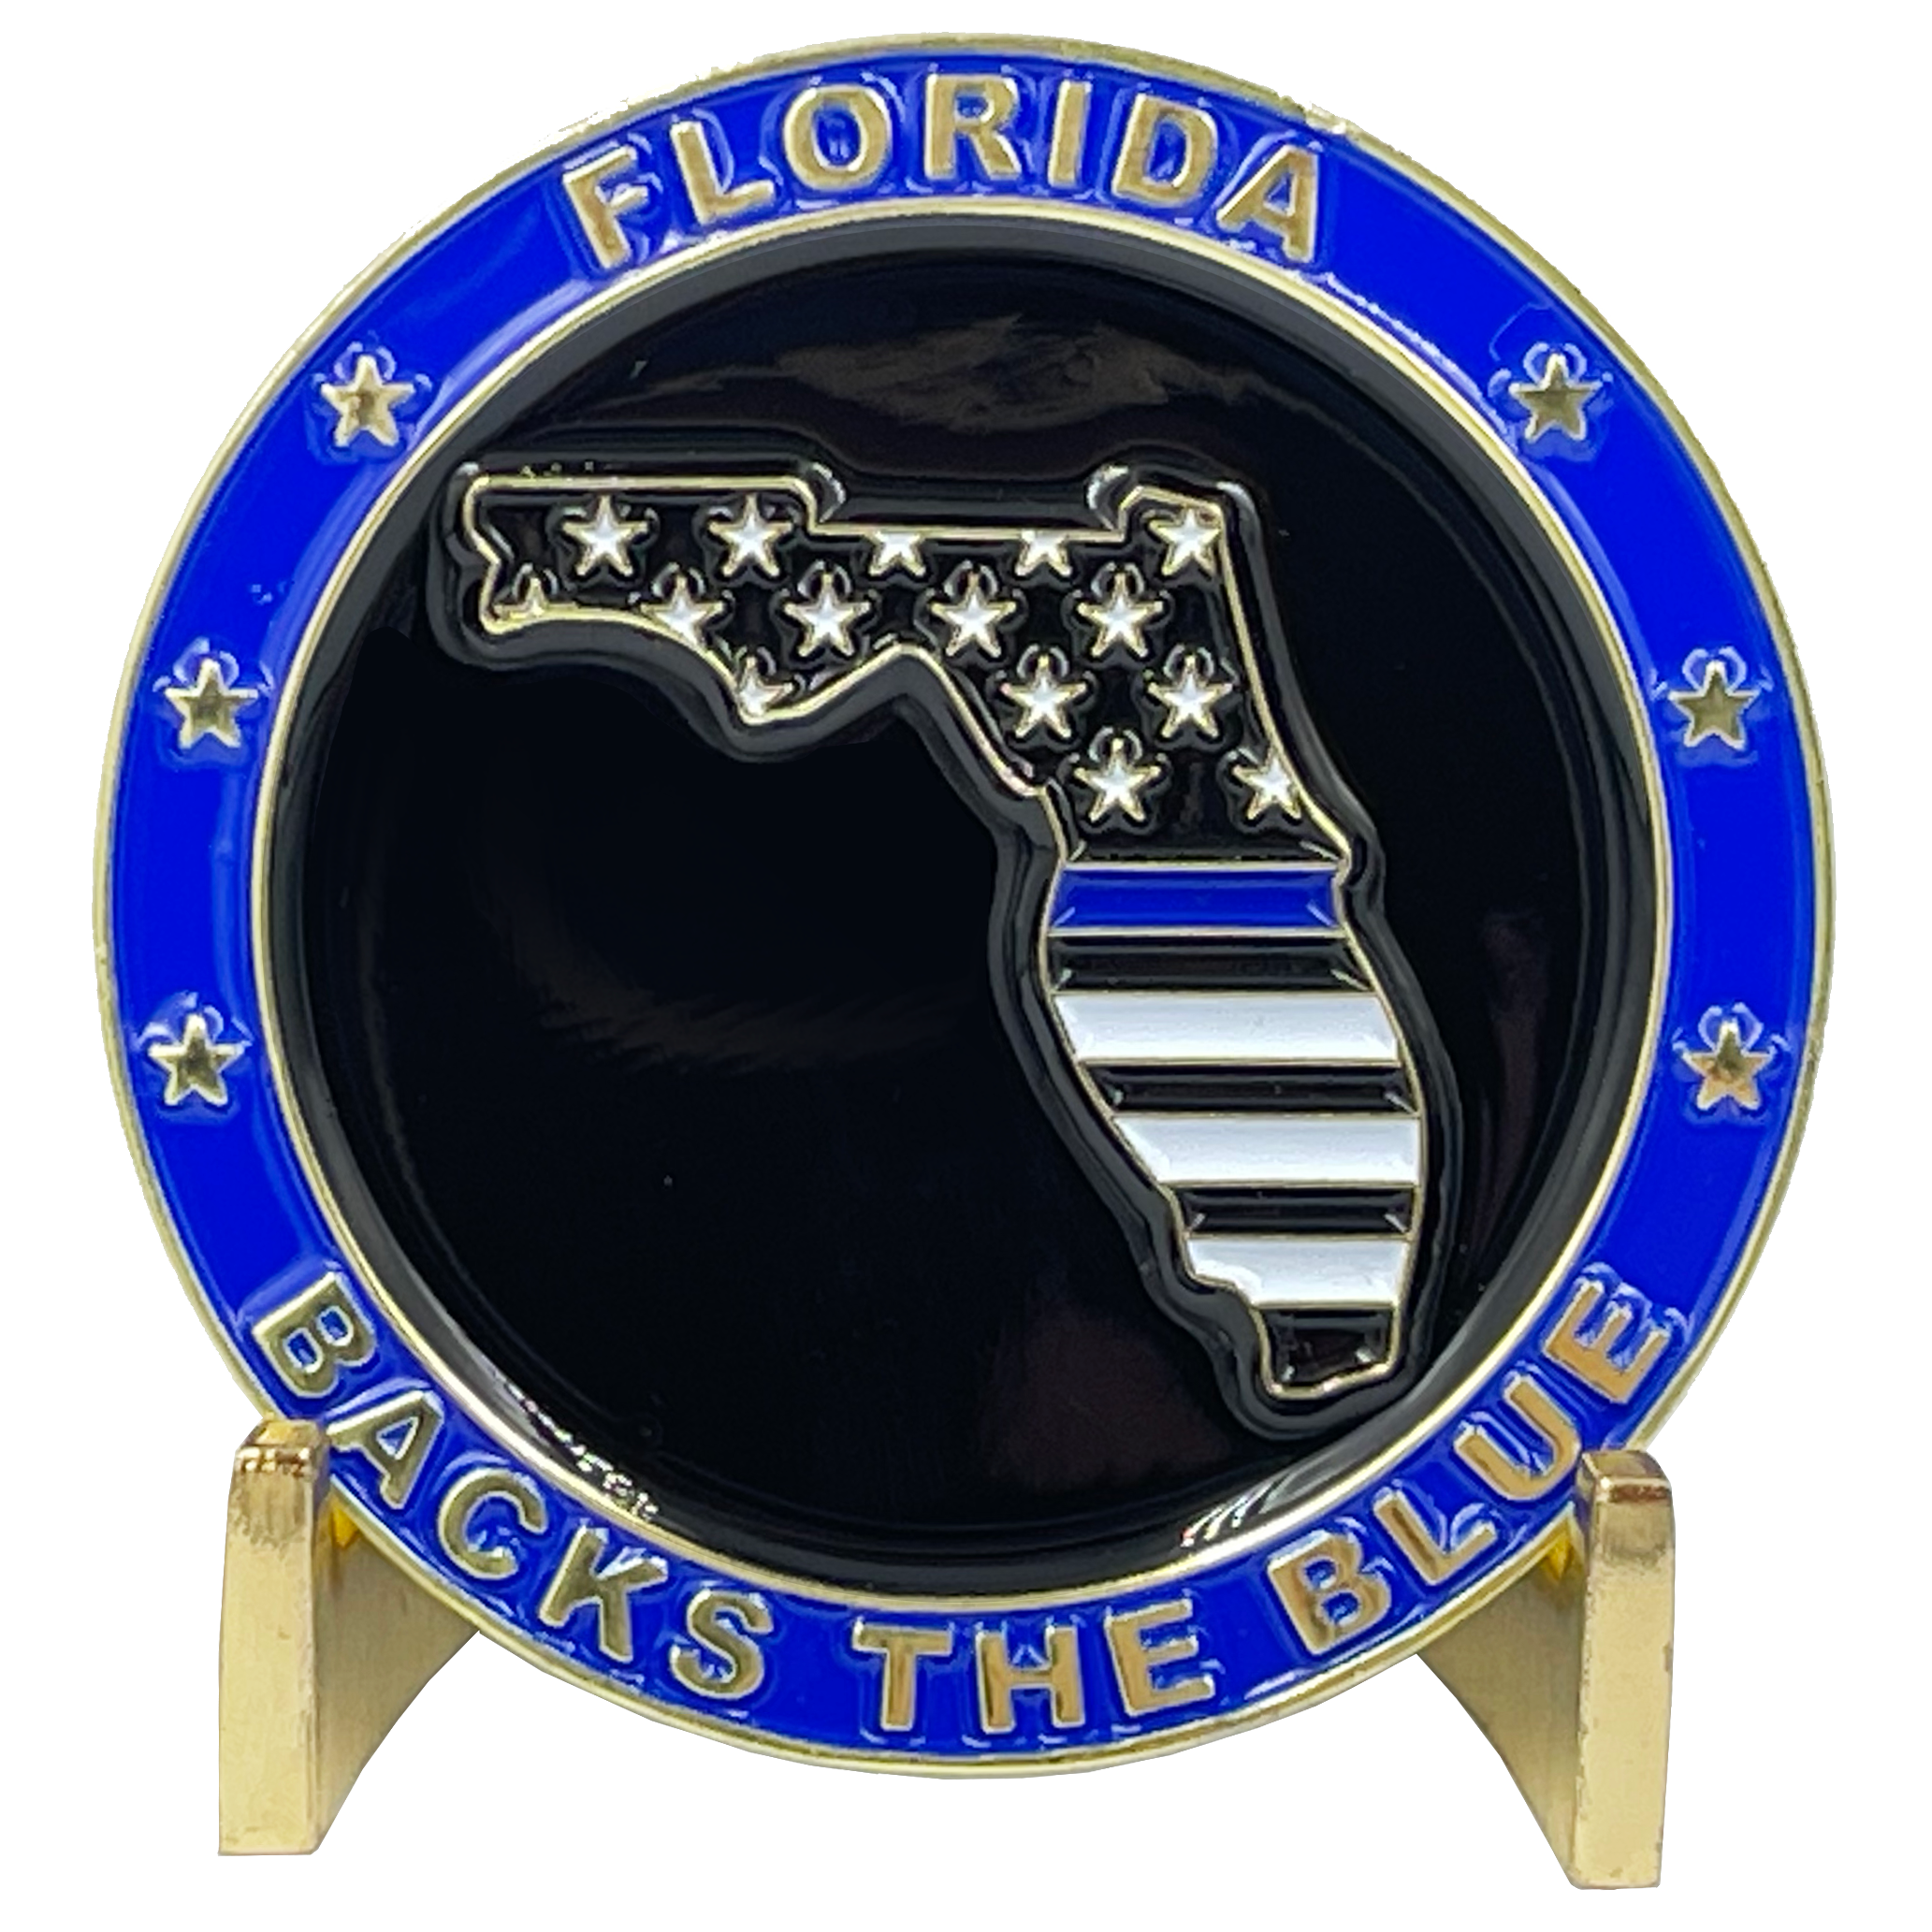 BL3-002 Florida BACKS THE BLUE Thin Blue Line Police Challenge Coin with free matching State Flag pin back the blue FHP Miami BSO Sheriff CBP Tallahassee Tampa Orlando Jacksonville trooper